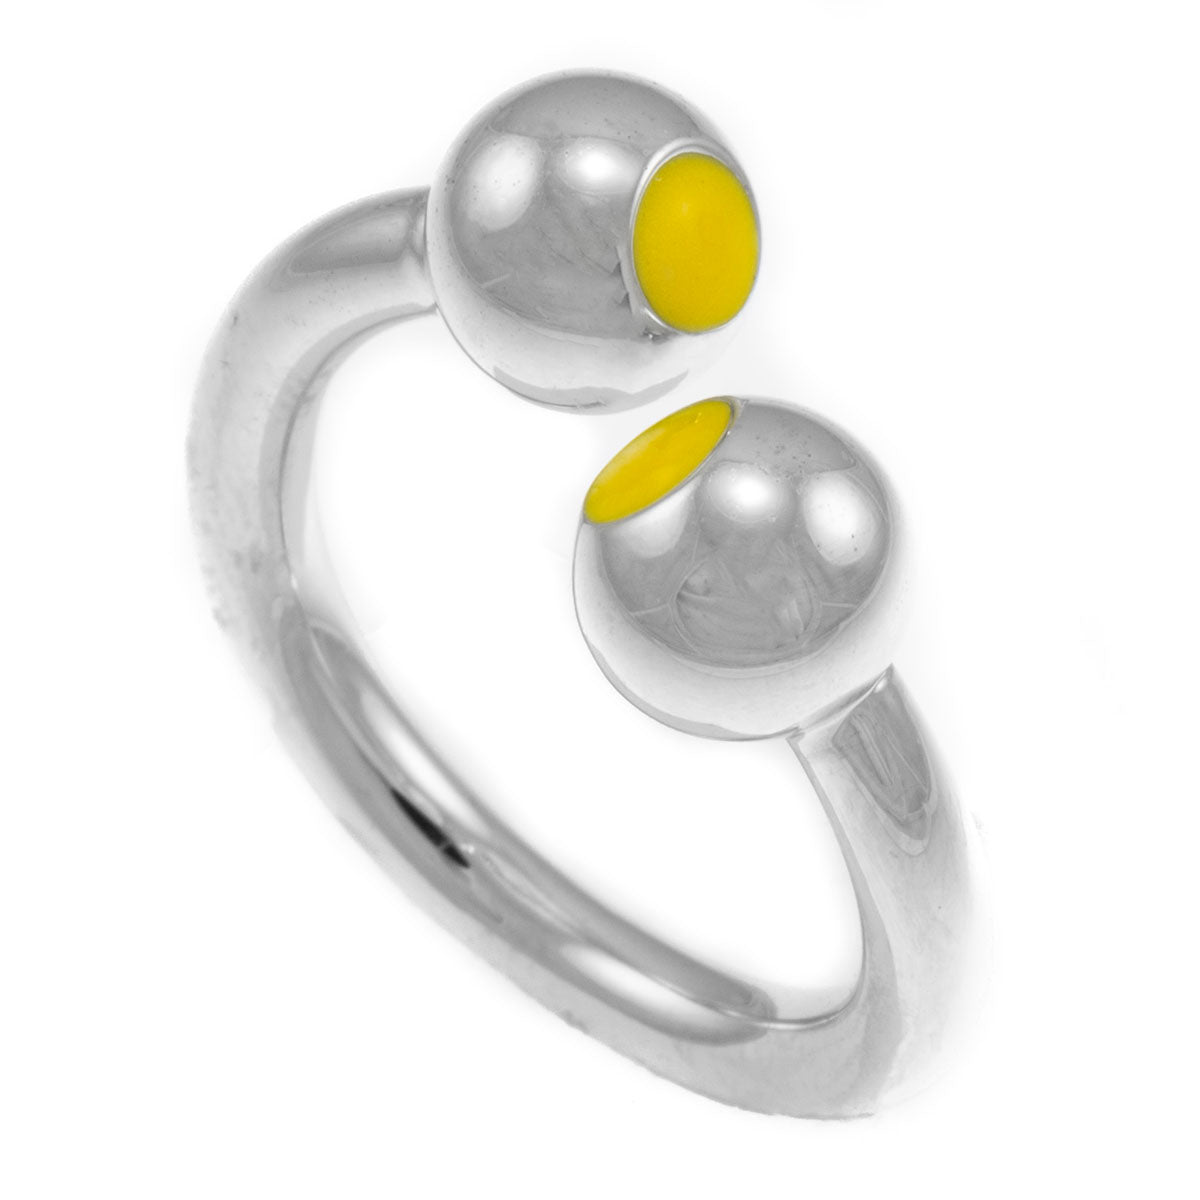 Gifts Infinity Adjustable Ring for Women, Lazy Daisy, Sterling Silver, Fits Ring, Open-Space Adjustable Fashion Stackable Ring